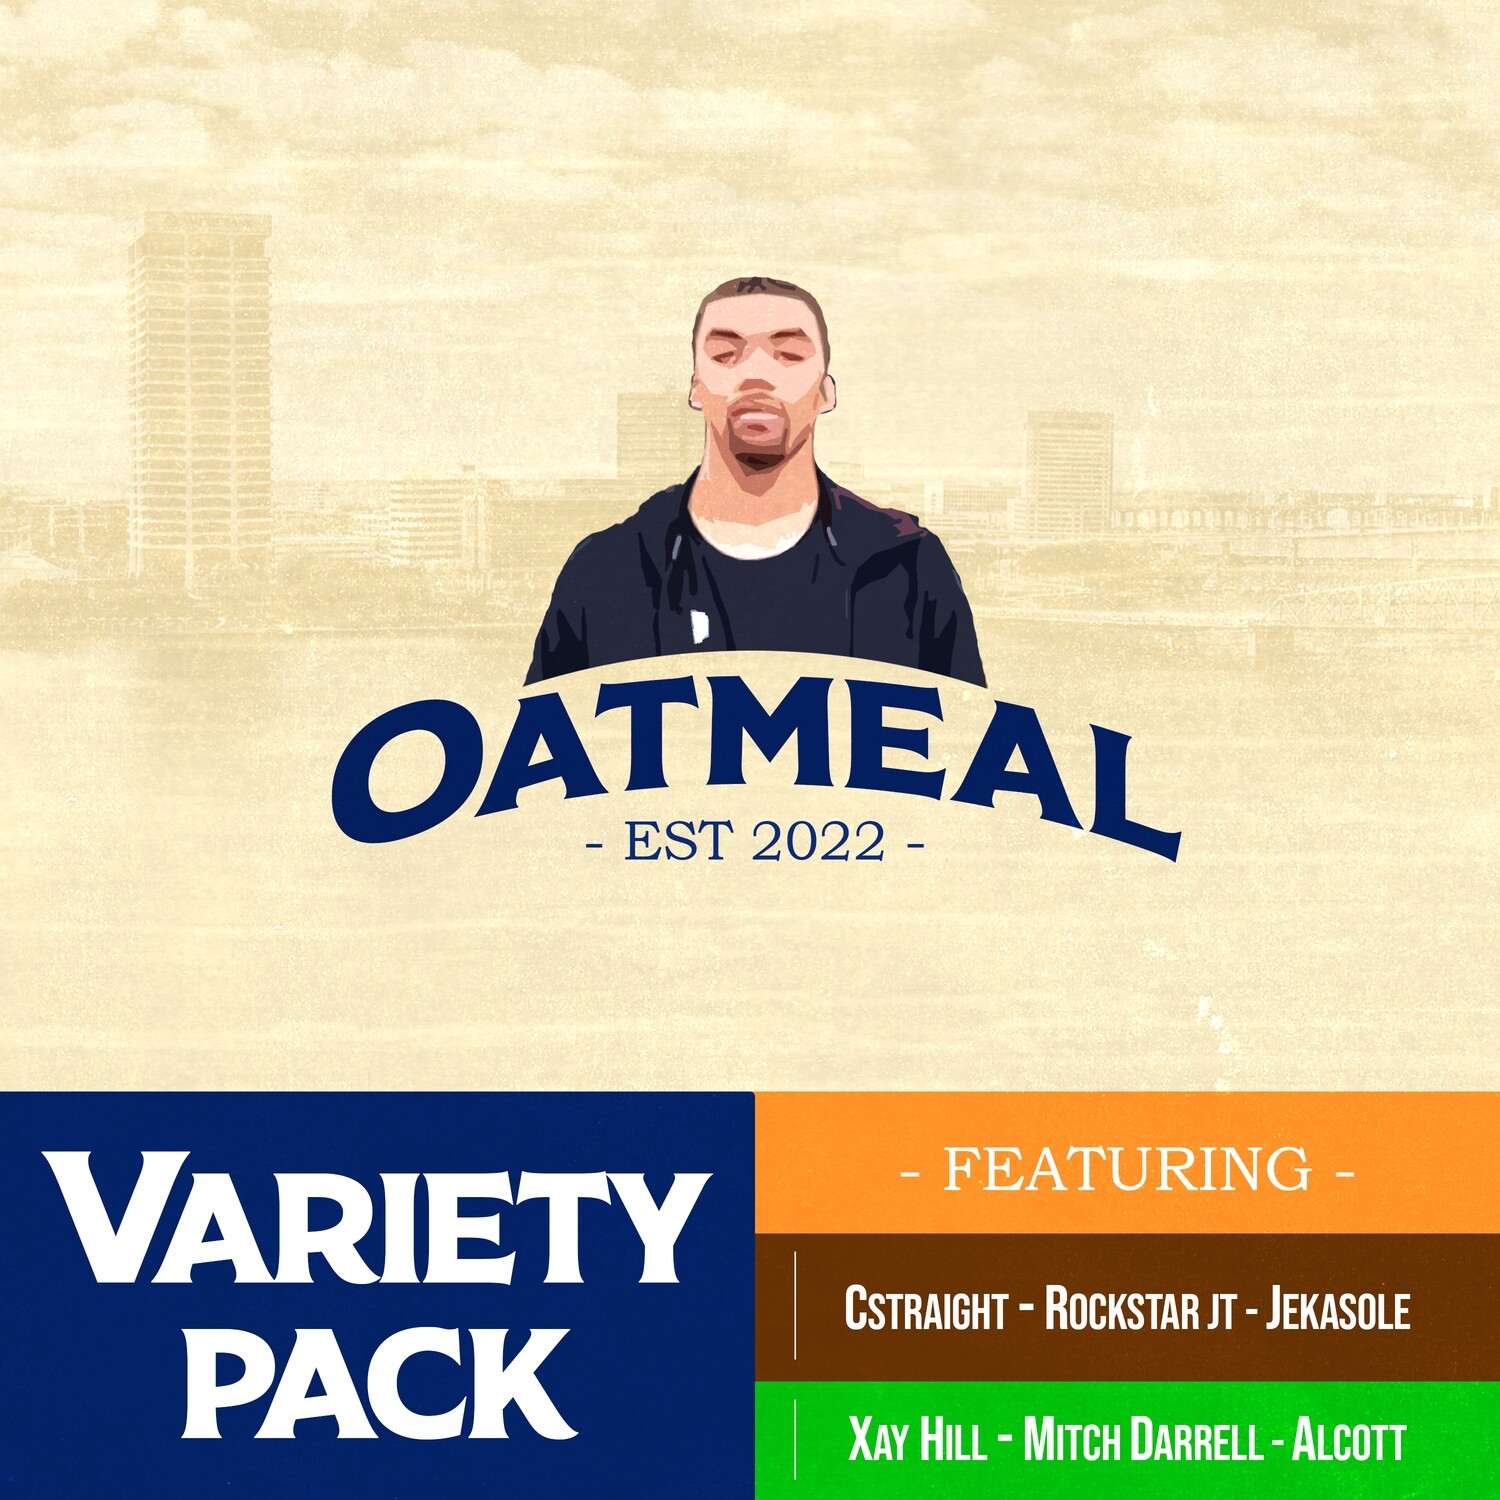 Oatmeal "Variety Pack" CD